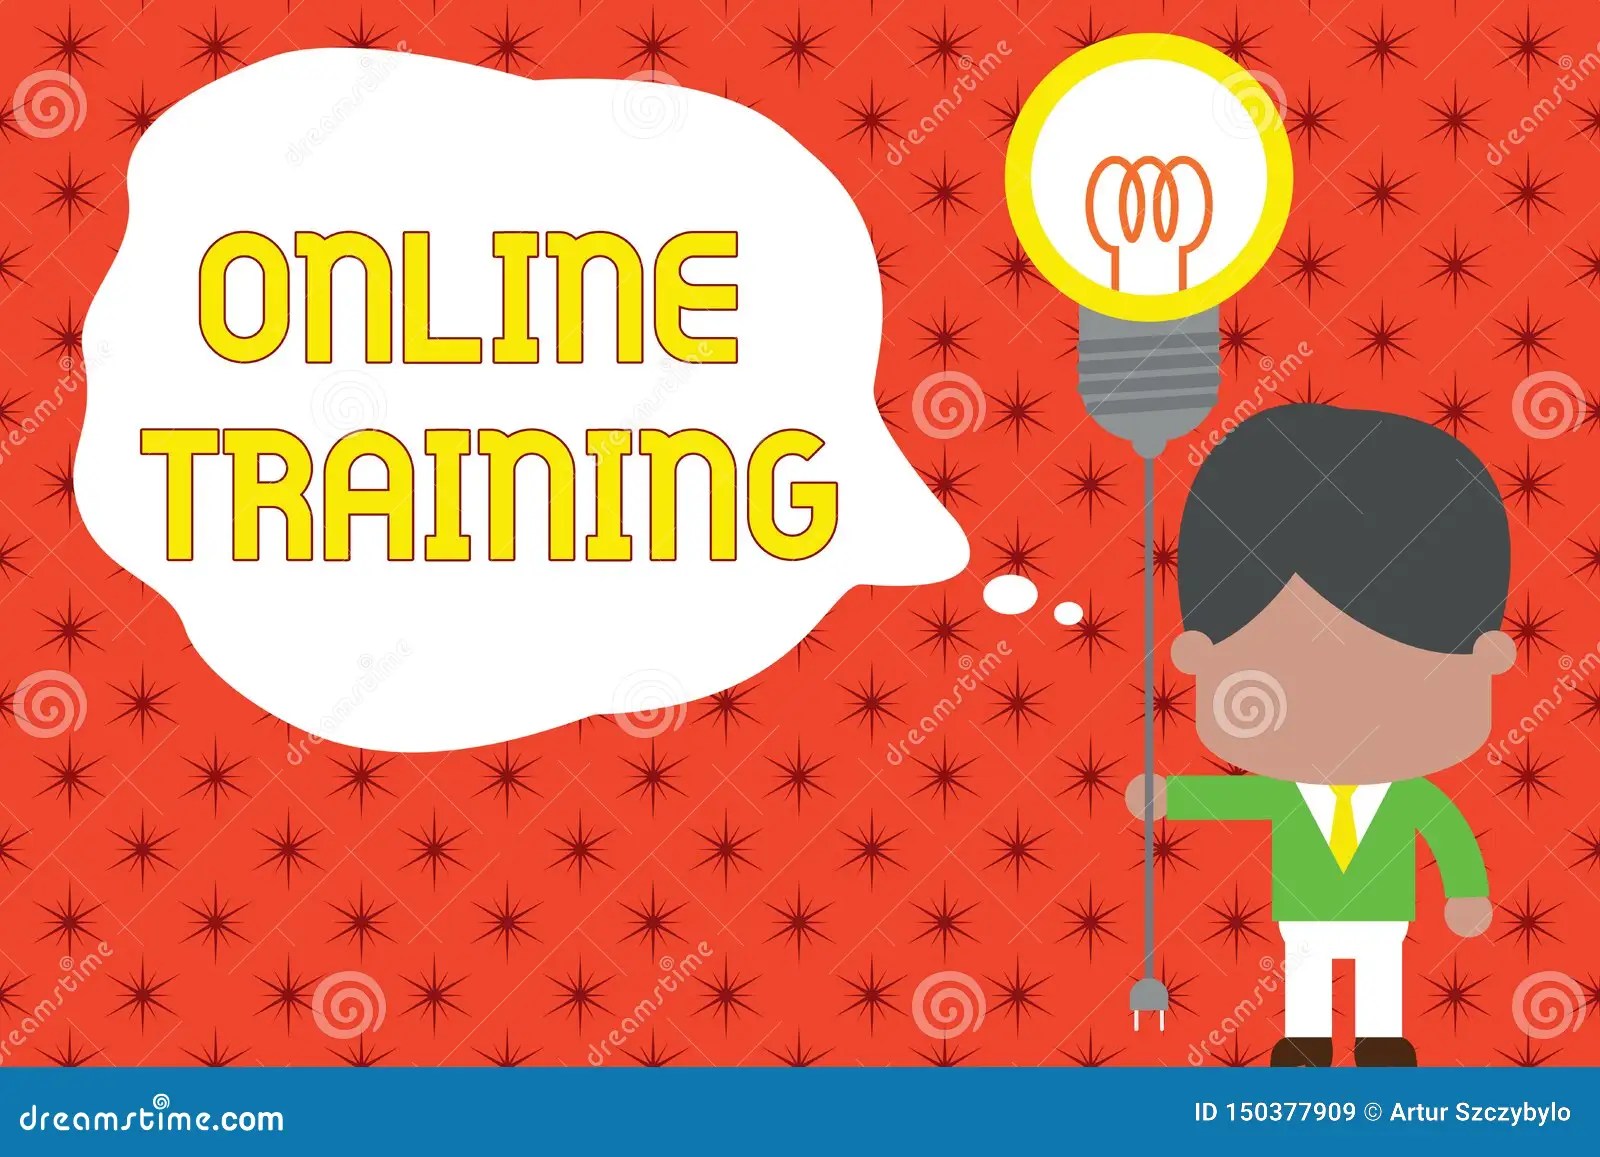 How To Start An Online Training Business